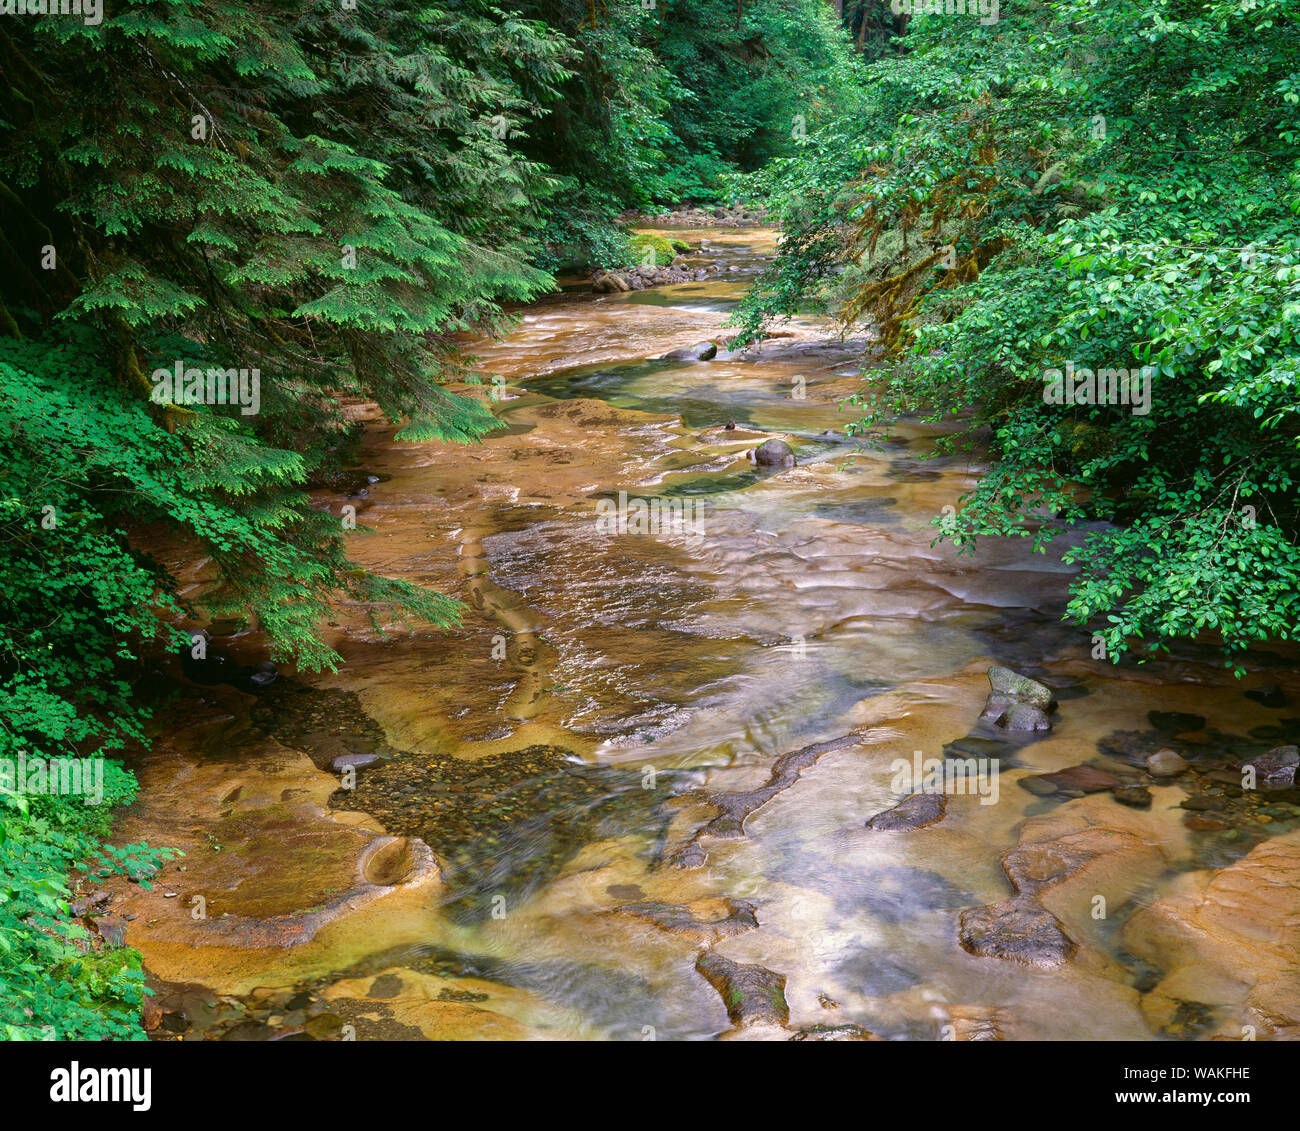 USA, Oregon. Willamette National Forest, conifers and alders line banks of Soda Creek in early summer. Stock Photo